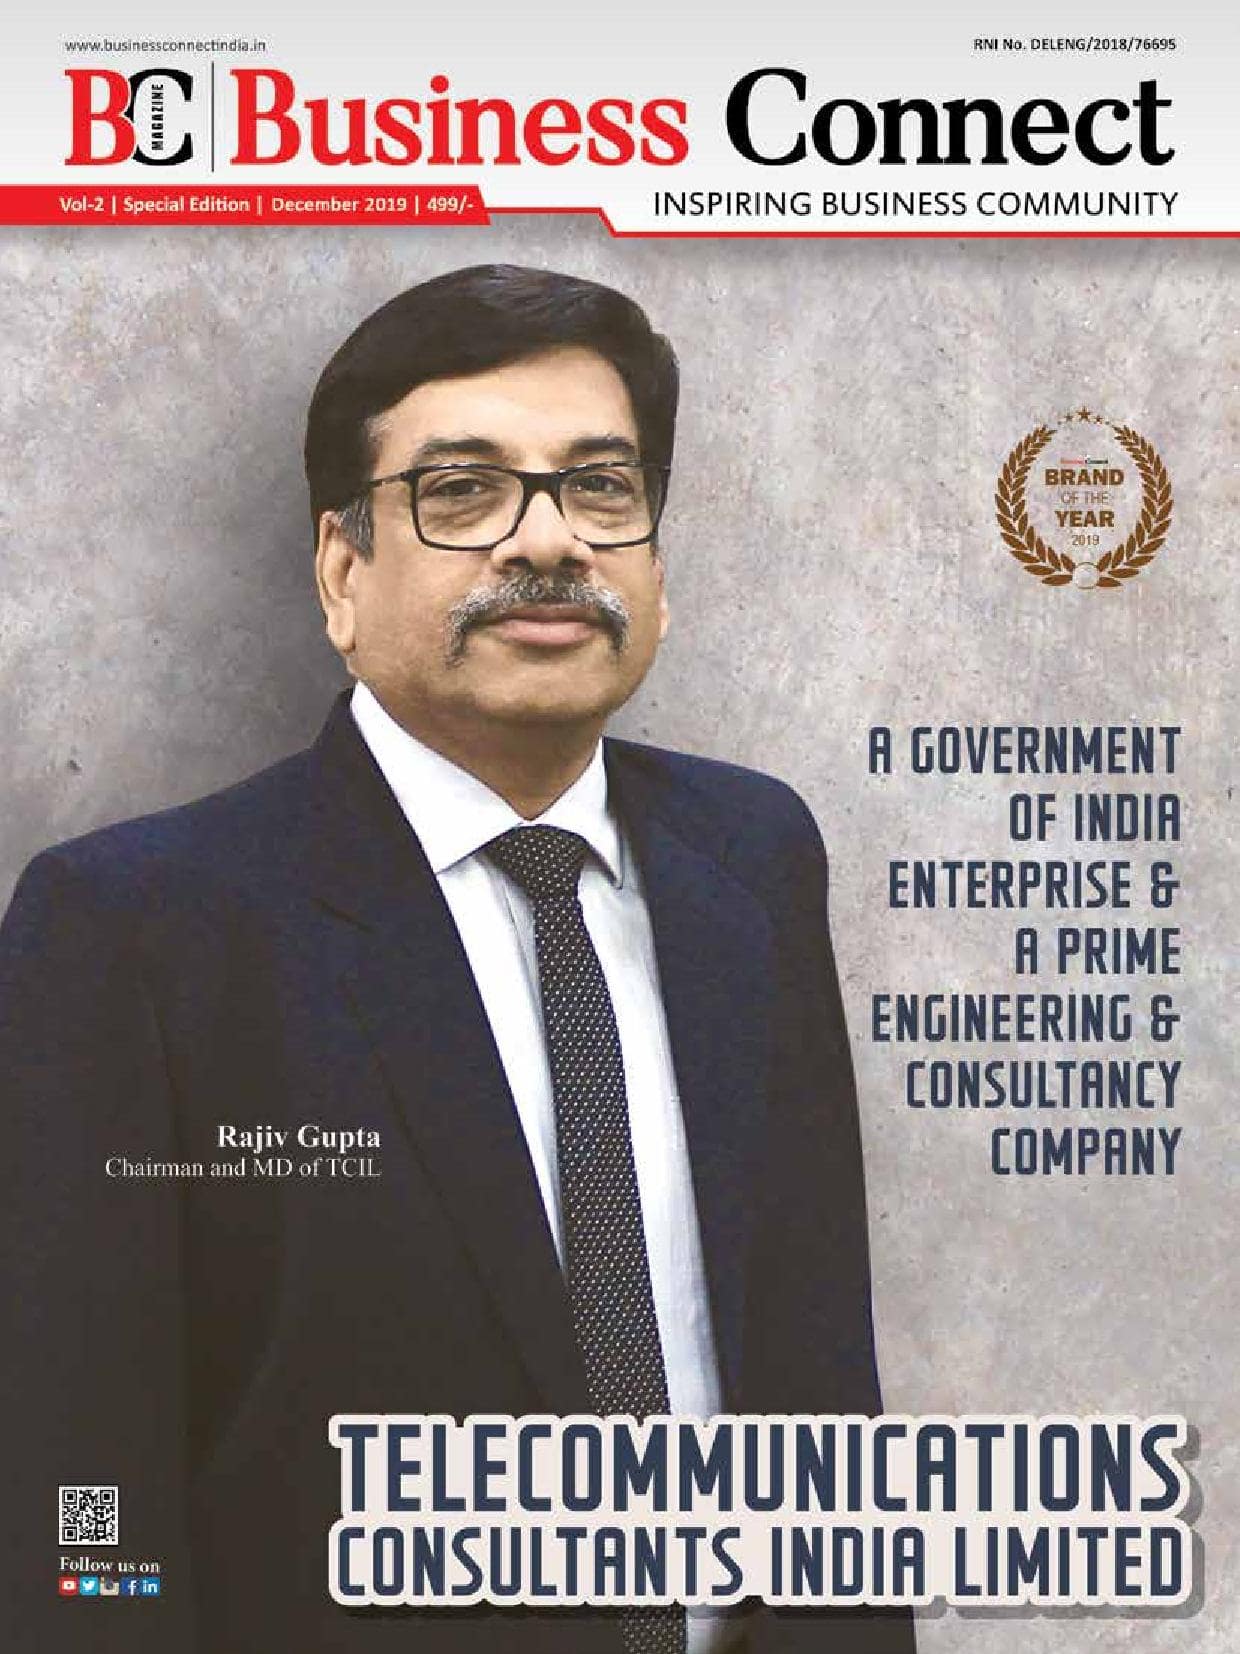 Business Magazine In India 2019 | Business Connect Magazine